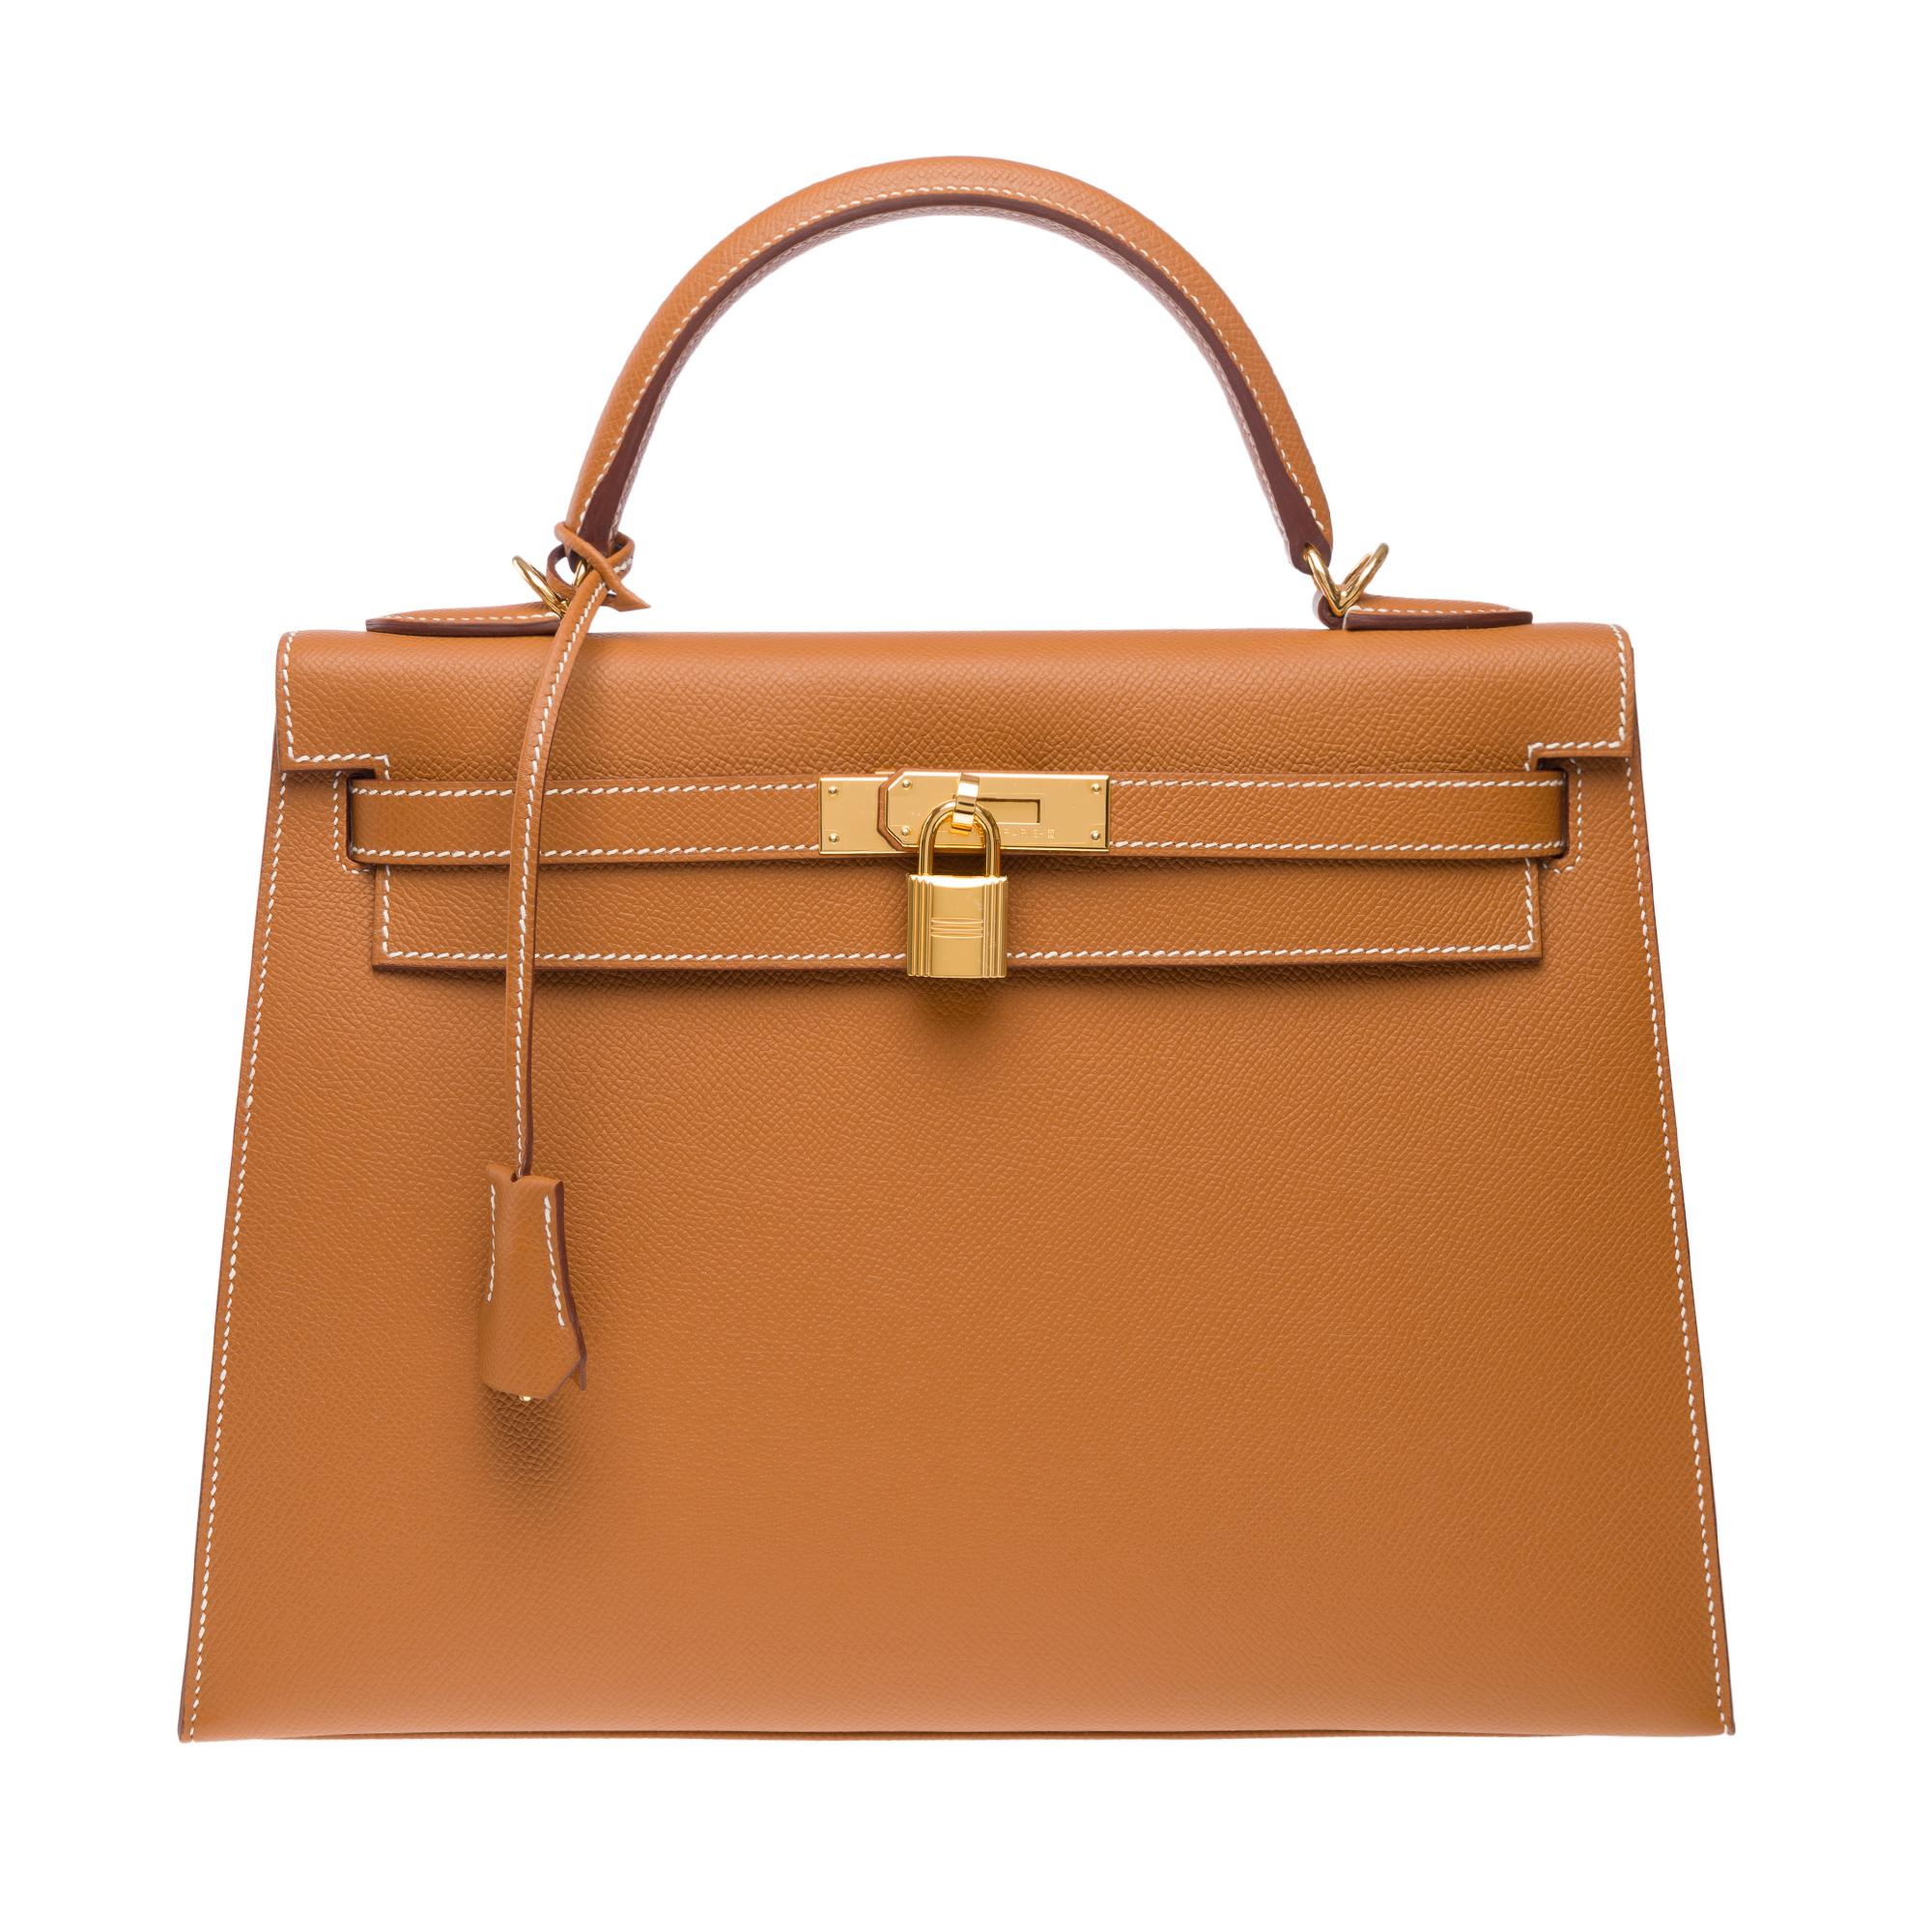 New Hermès Kelly 32 sellier handbag strap in Camel Epsom calf leather, GHW In New Condition For Sale In Paris, IDF